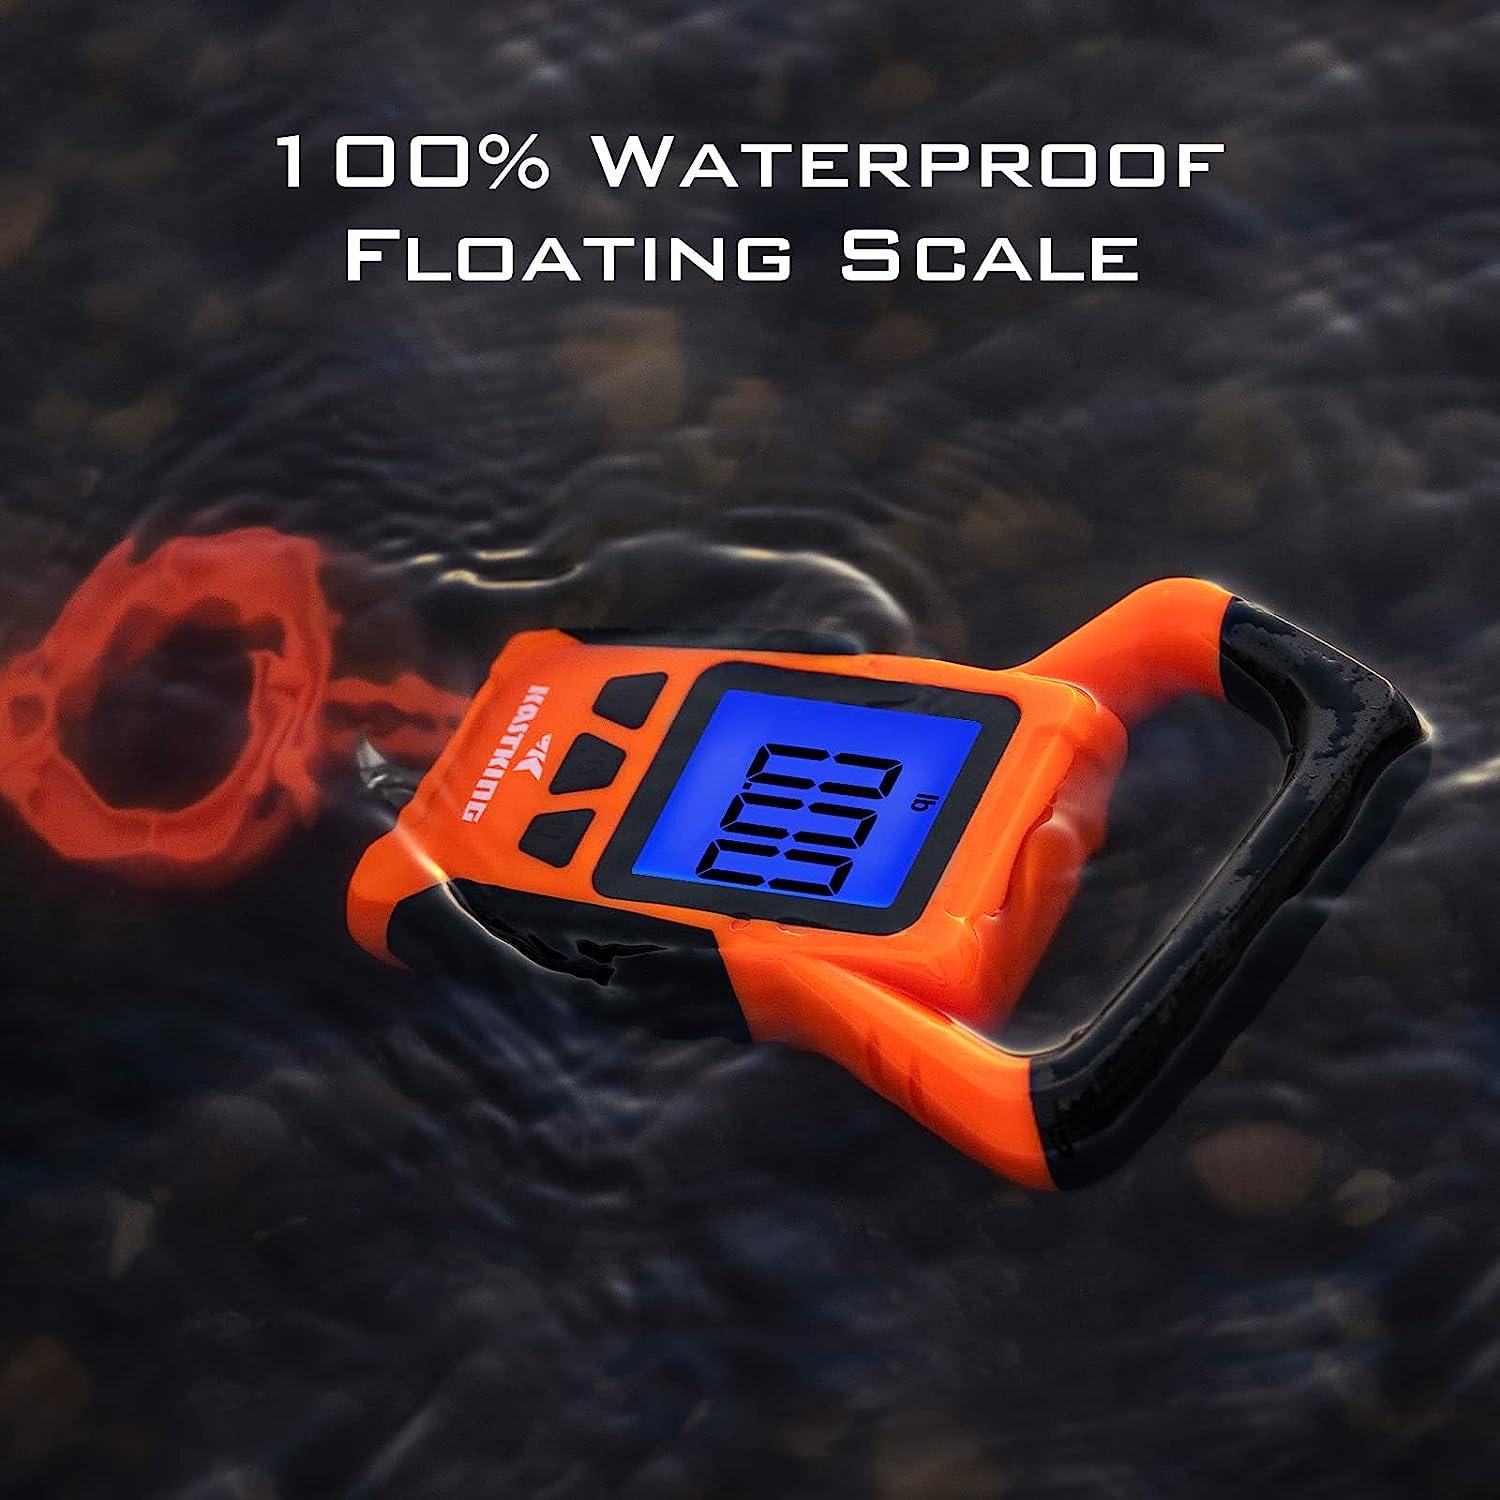 KastKing Fish Scale, WideView Floating Waterproof Digital Scale, 2.5 Large  LCD Display, 110lb Capacity, Multi-Mode Pound/Ounces & Kilograms, Stores up  to 9 Weights, Fishing Gifts for Men B: Orange combo